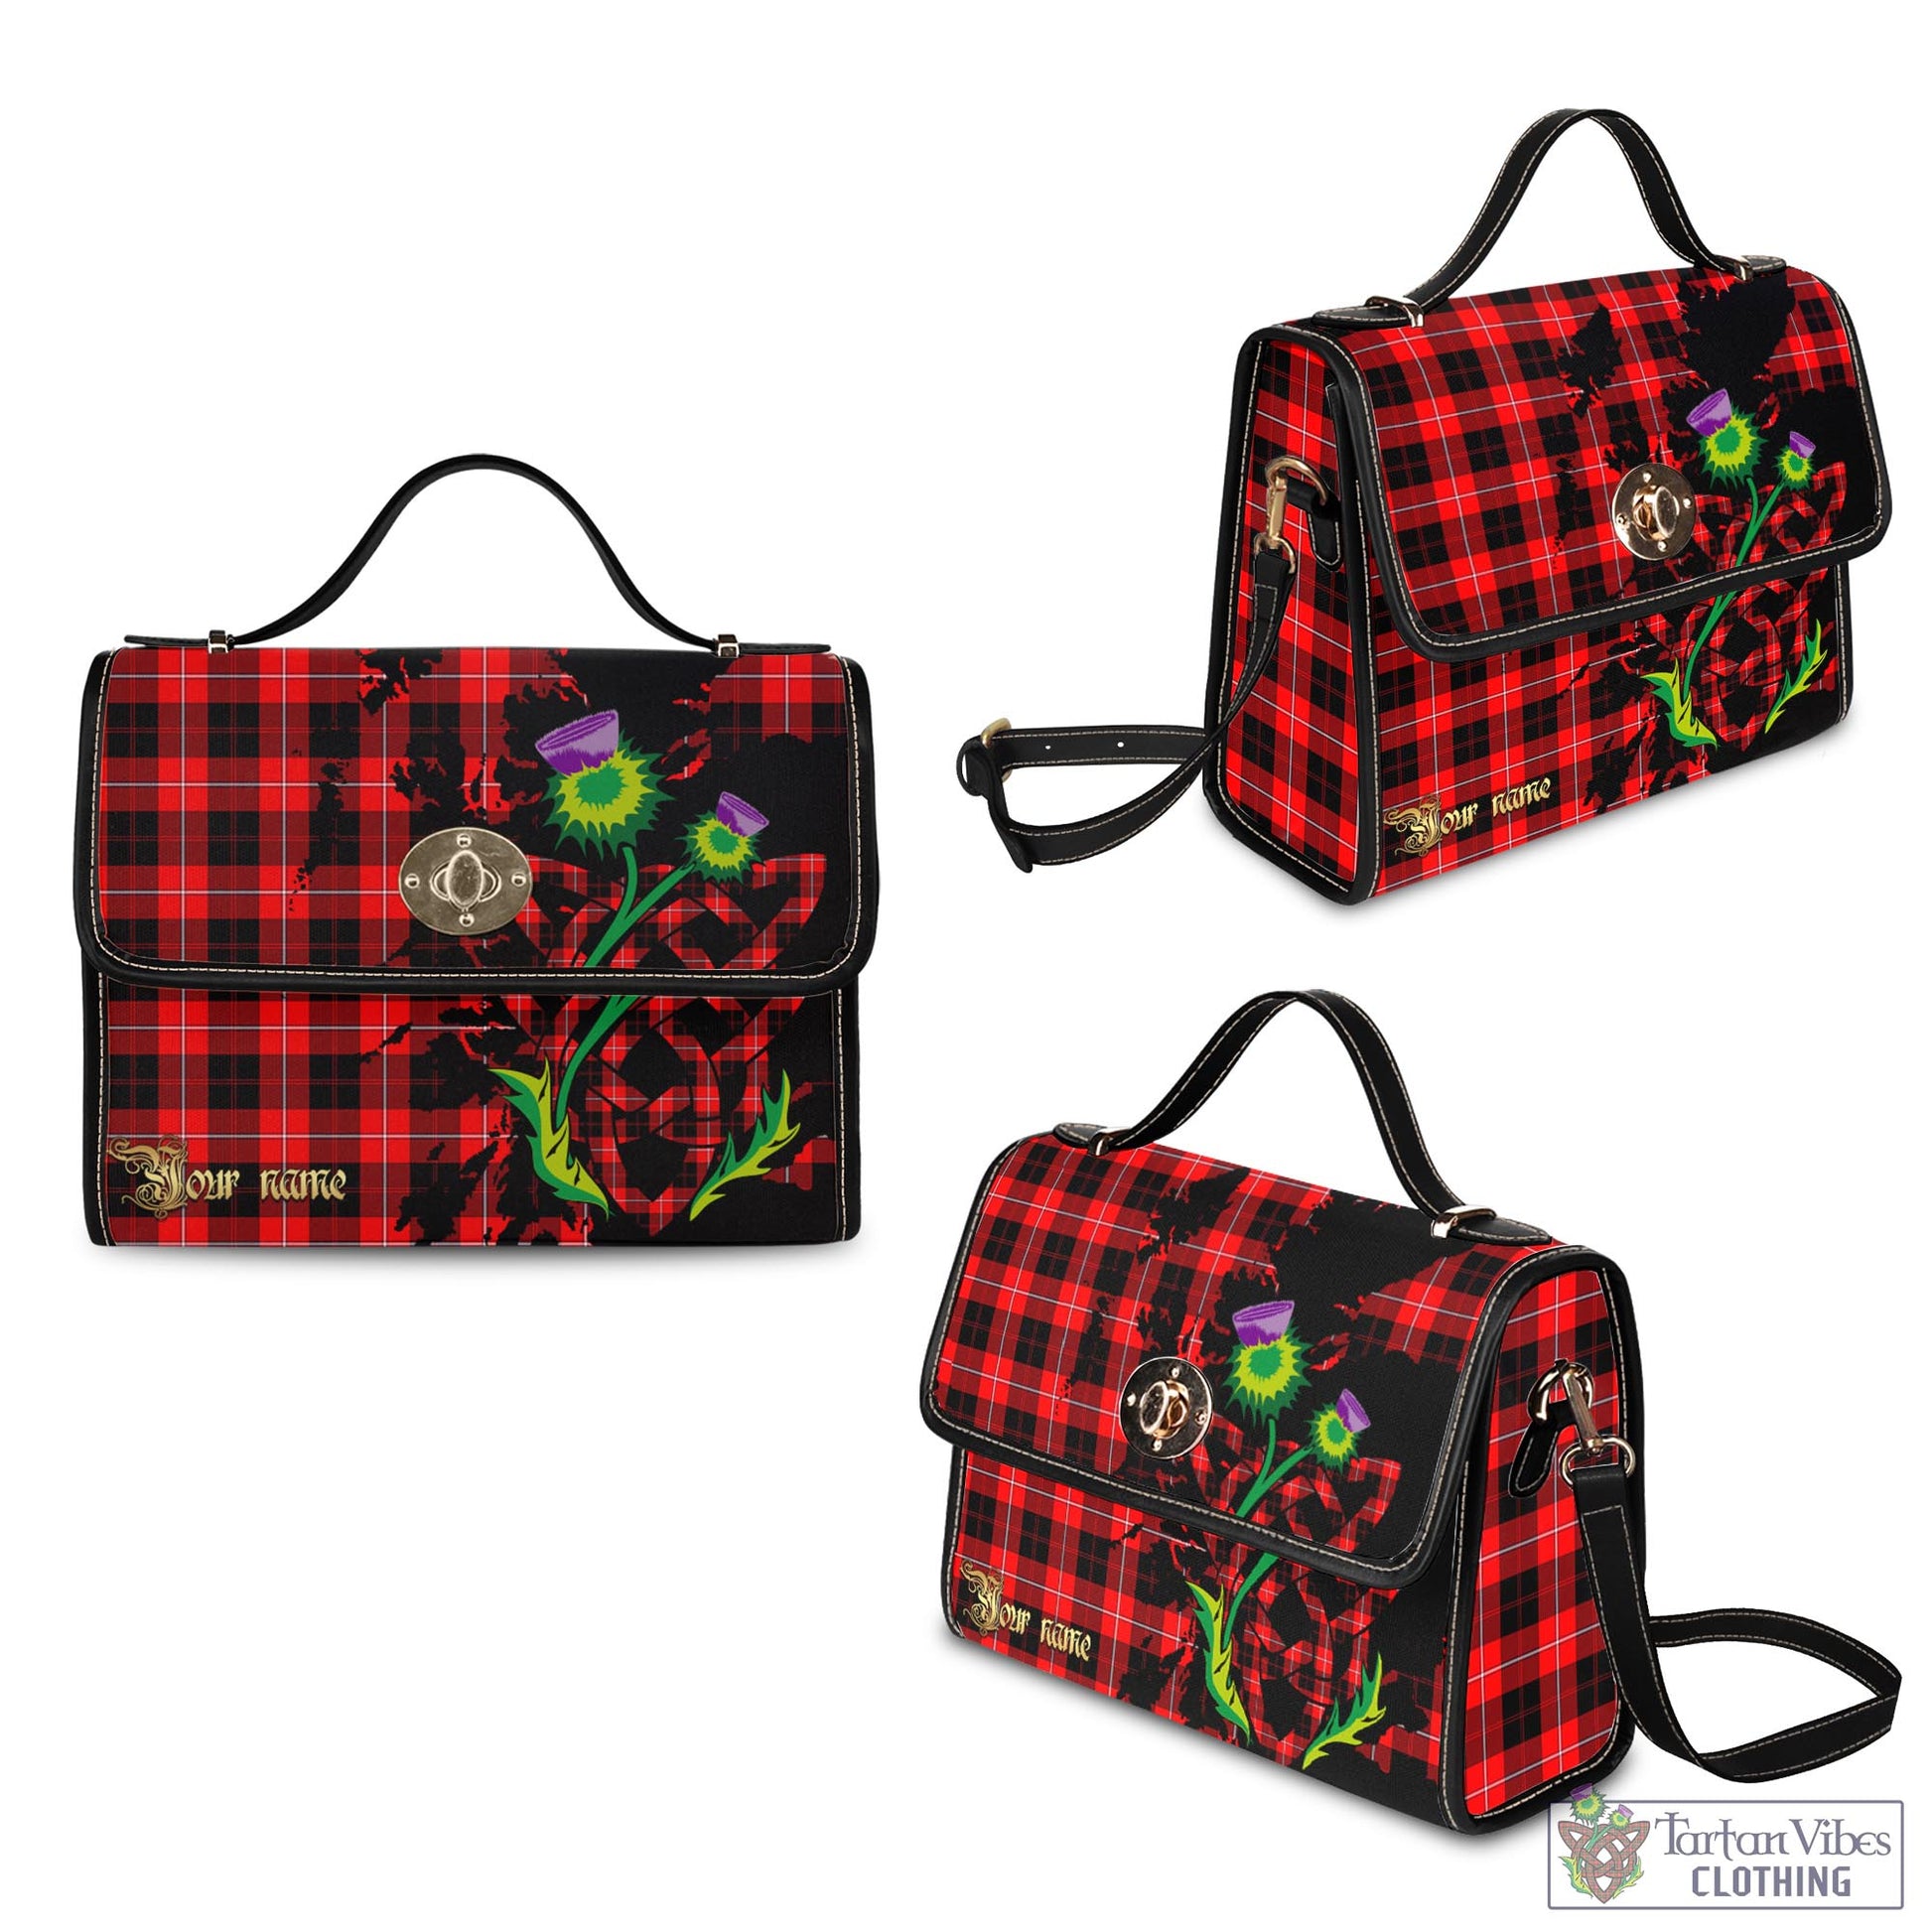 Tartan Vibes Clothing Cunningham Modern Tartan Waterproof Canvas Bag with Scotland Map and Thistle Celtic Accents